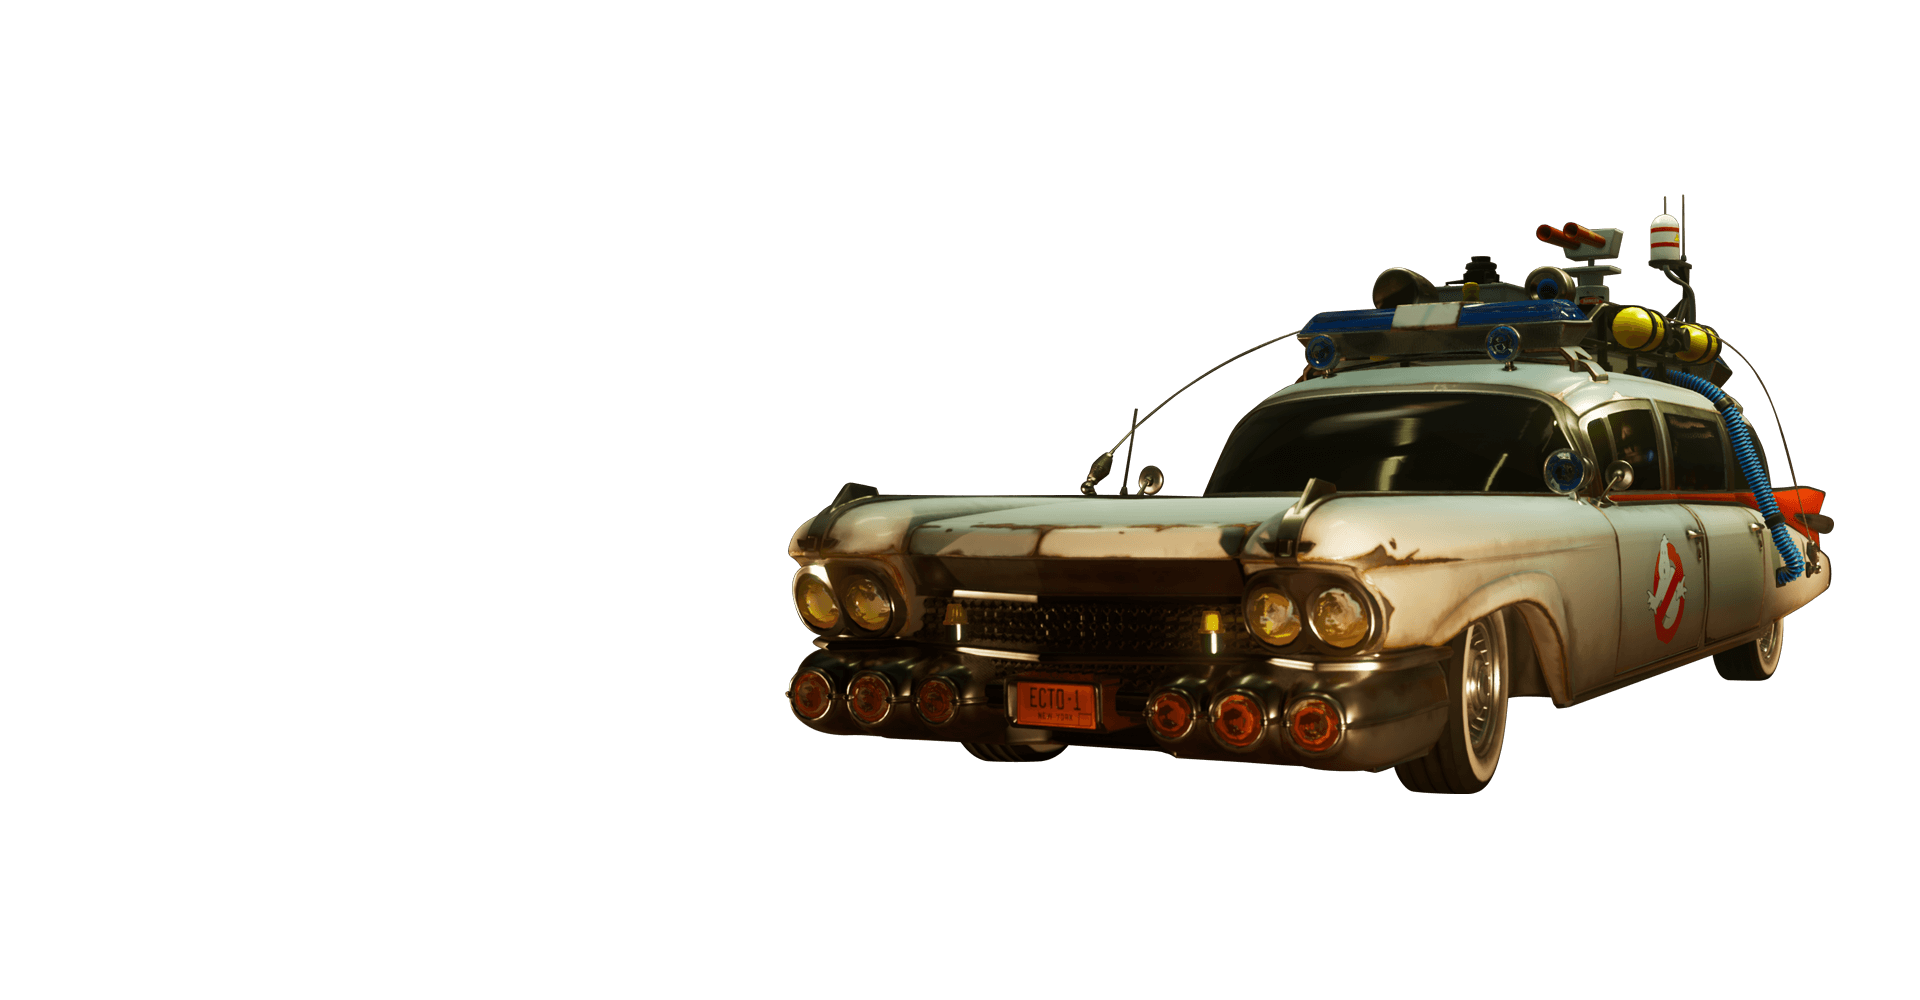 Ecto 1 vehicle from Ghostbusters